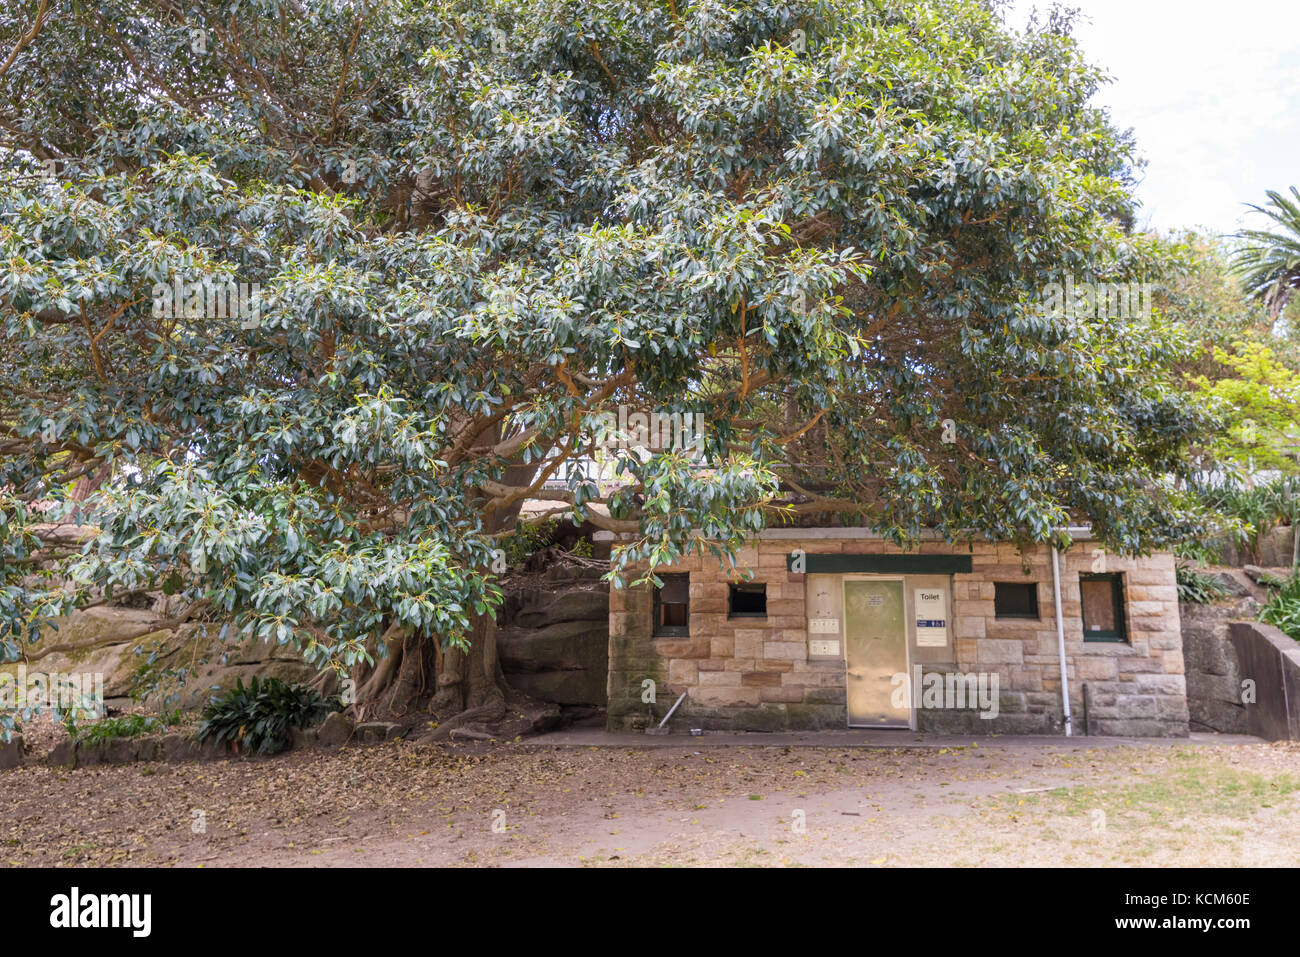 Public toilets in old traditional sandstone building under tree in Brennan Park, Wollstonecraft, North Shore, Sydney, NSW Stock Photo